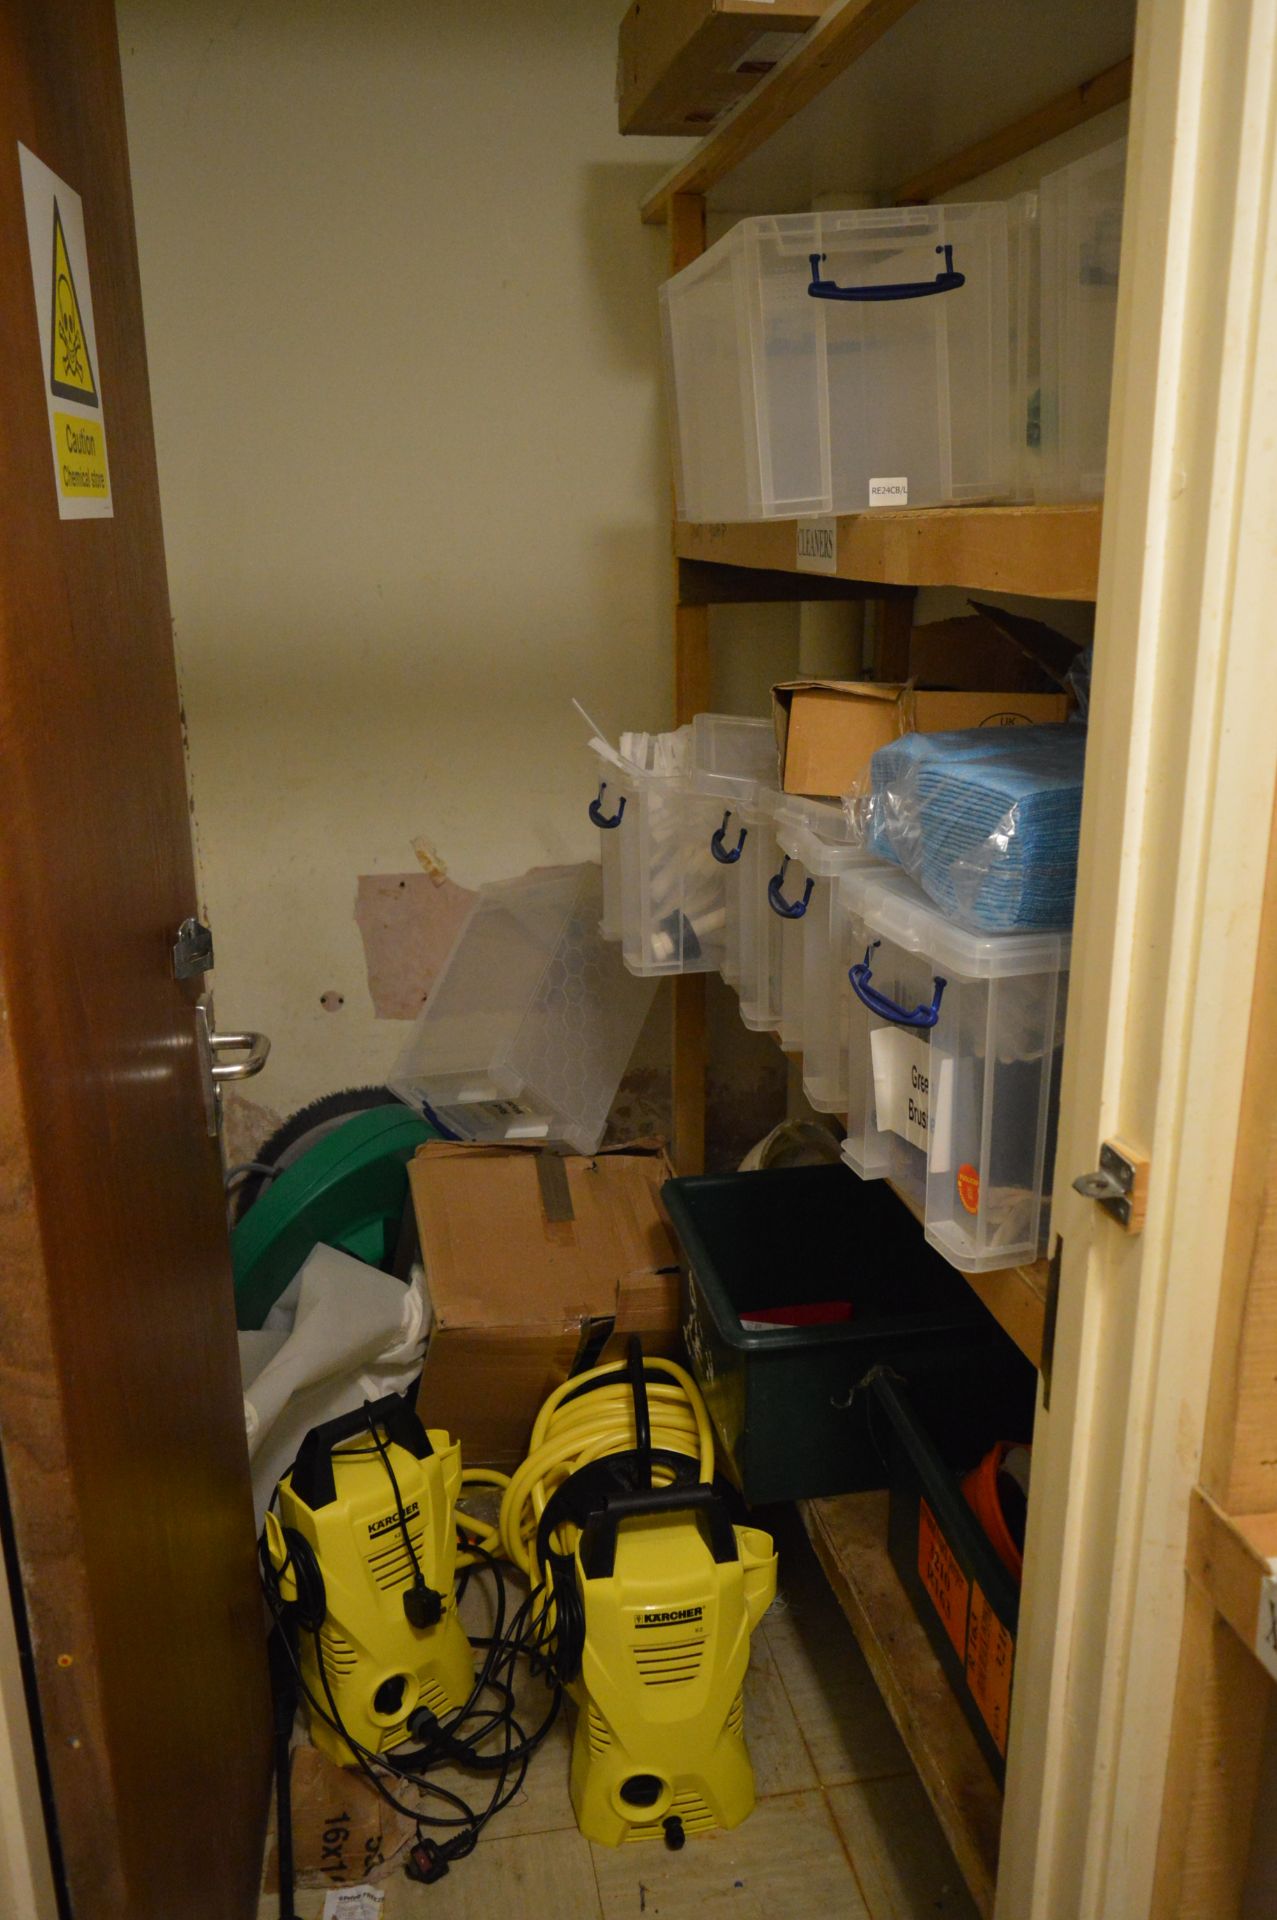 Contents of cleaners cupboard including 2 - Karcher K2 pressure washers, hose and reel, storage